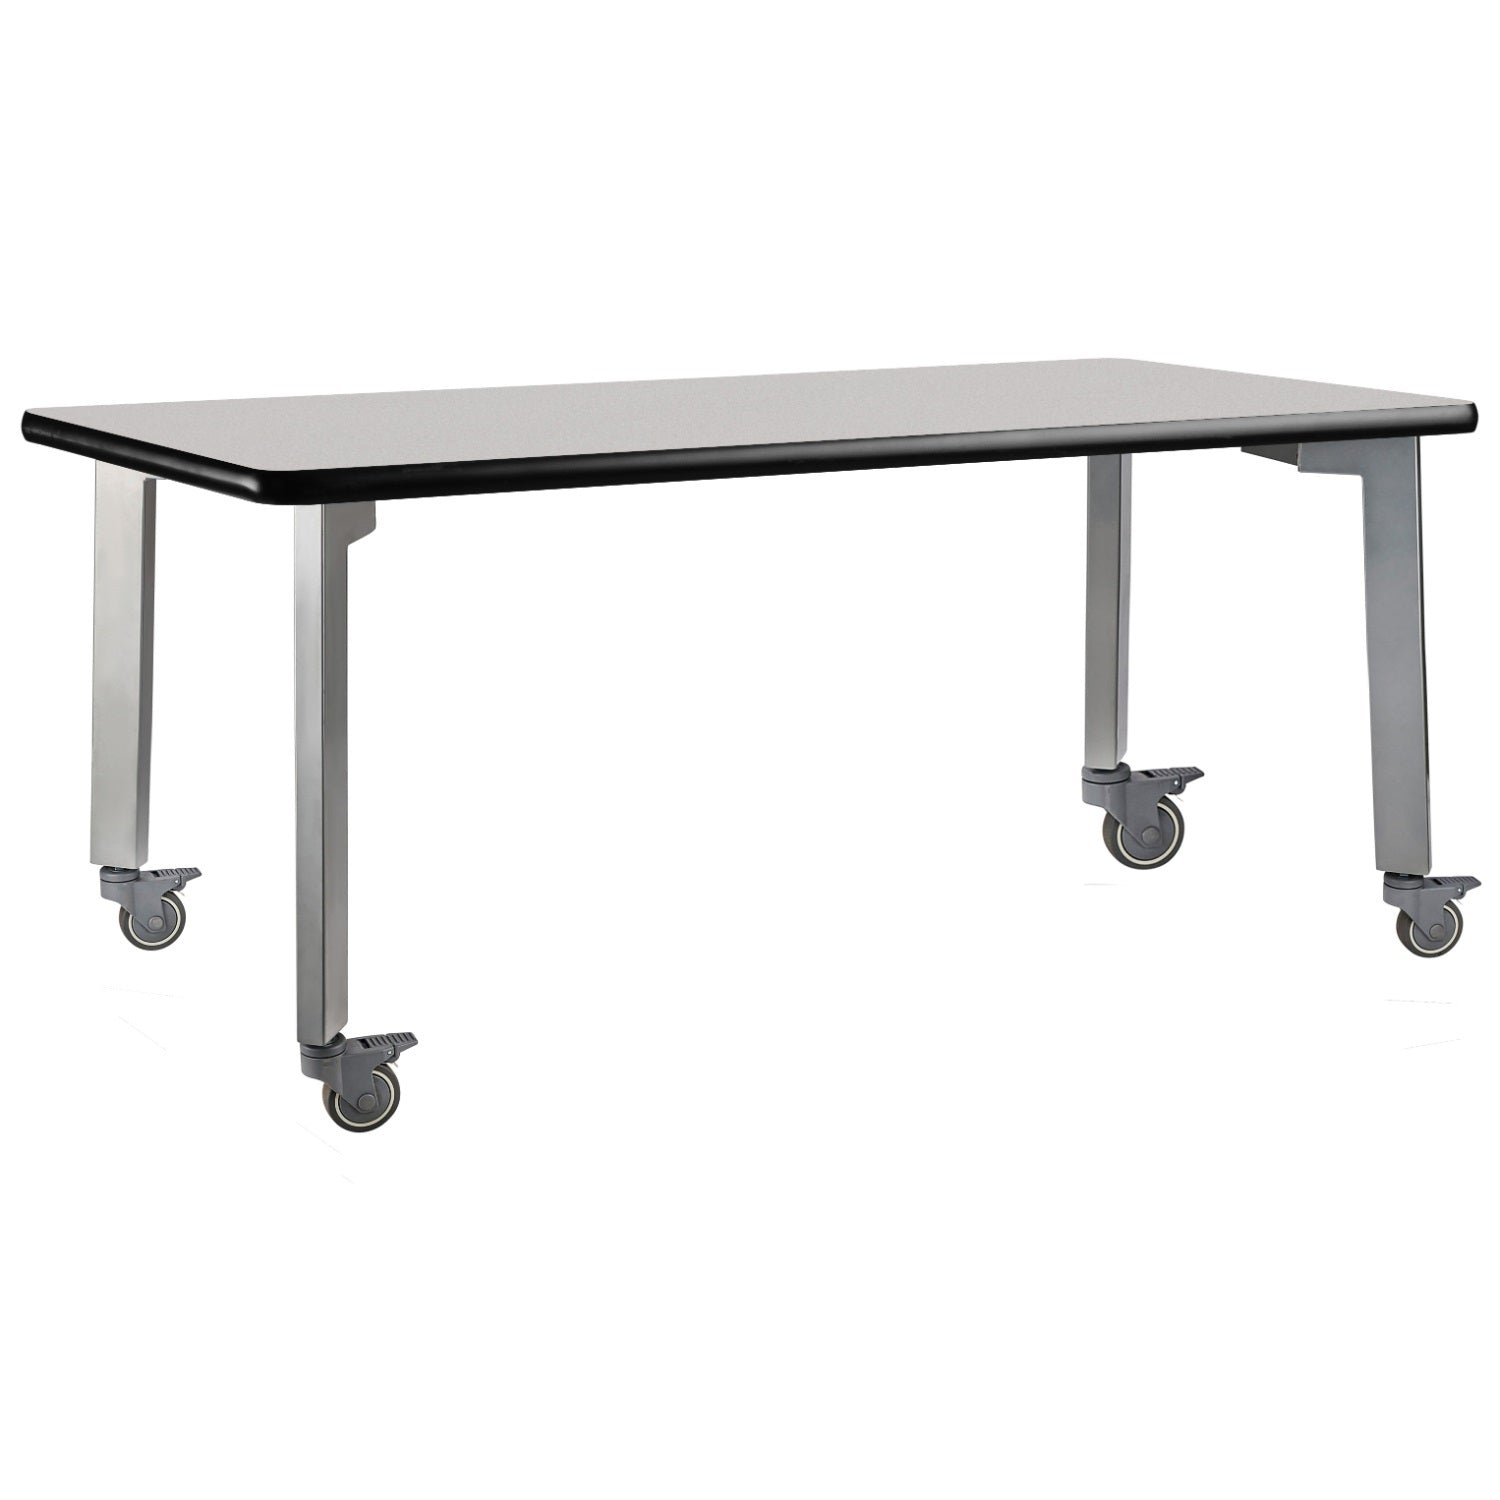 Titan Mobile Table, 36" x 48", Standard High Pressure Laminate Top with Particleboard Core and T-Mold Edge